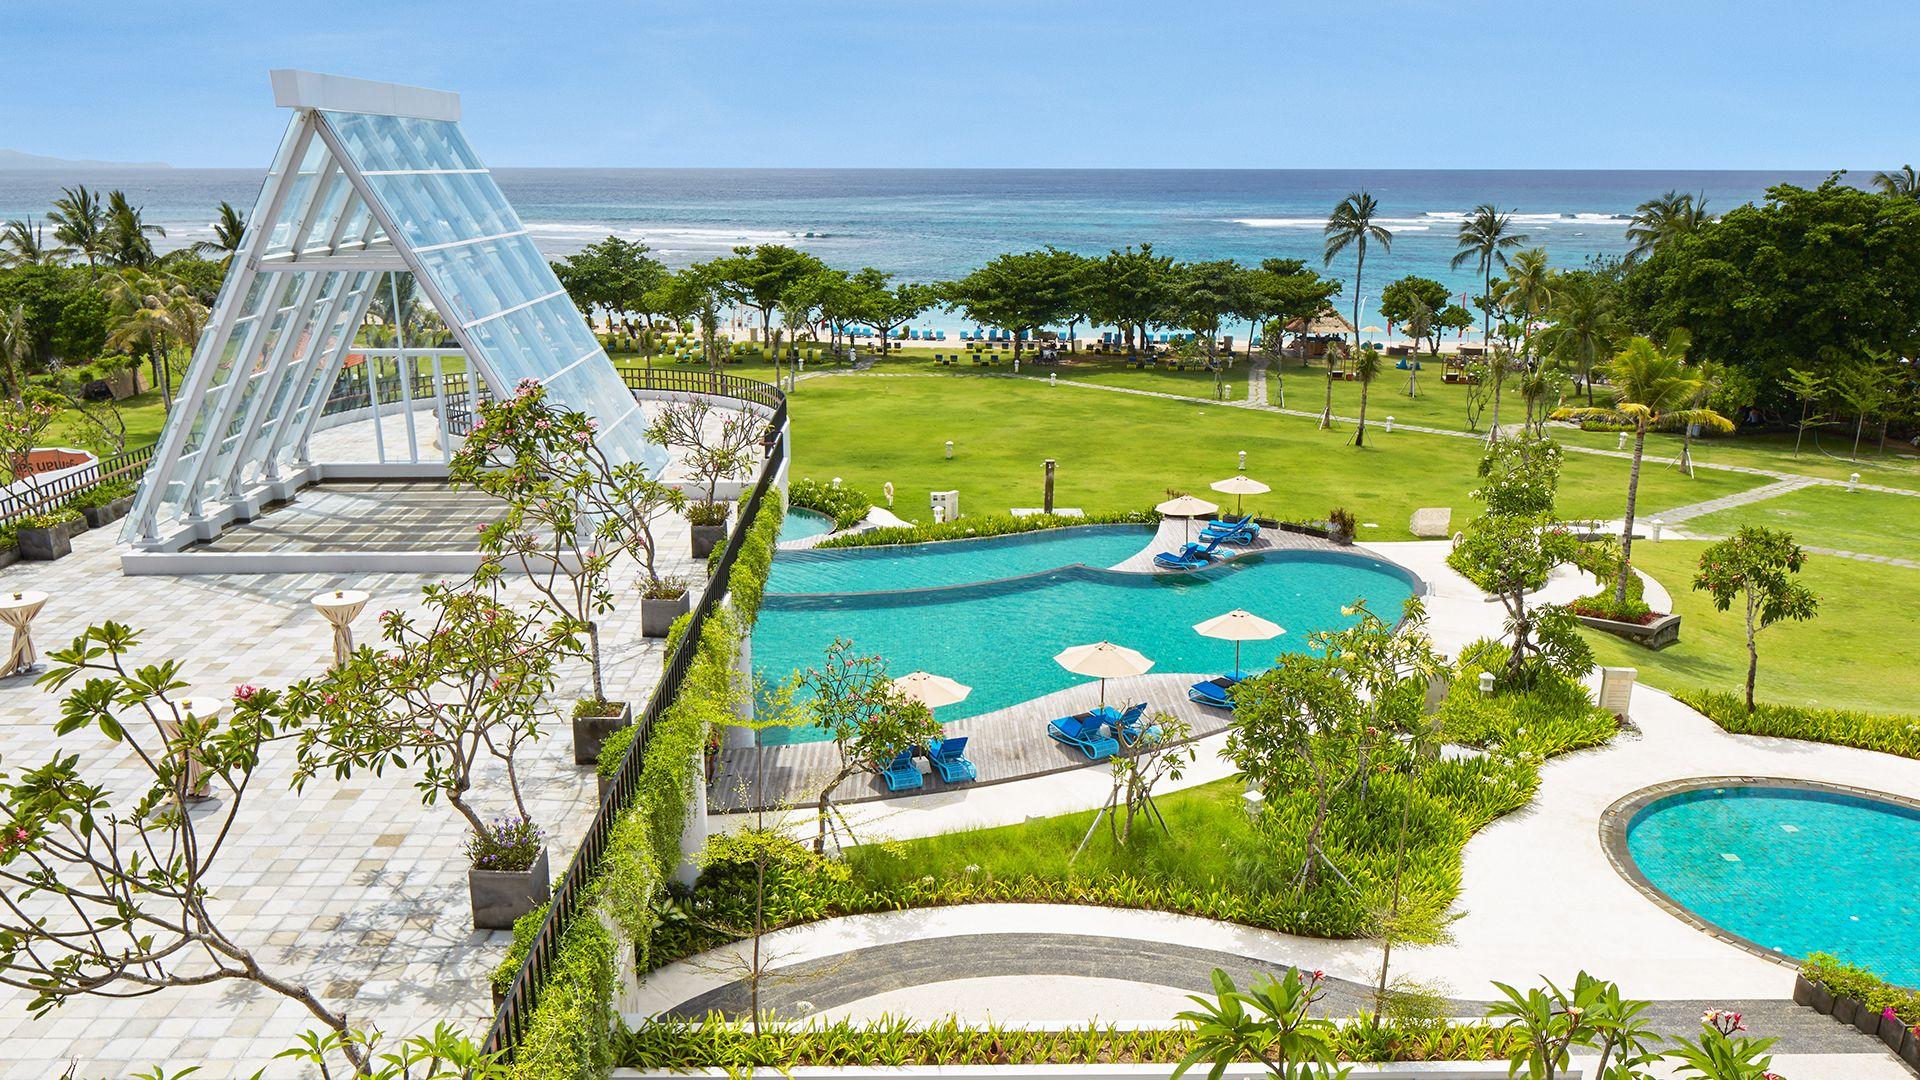 Award-Winning Beachfront Stay with Decadent Dining Inclusions, Nusa Dua